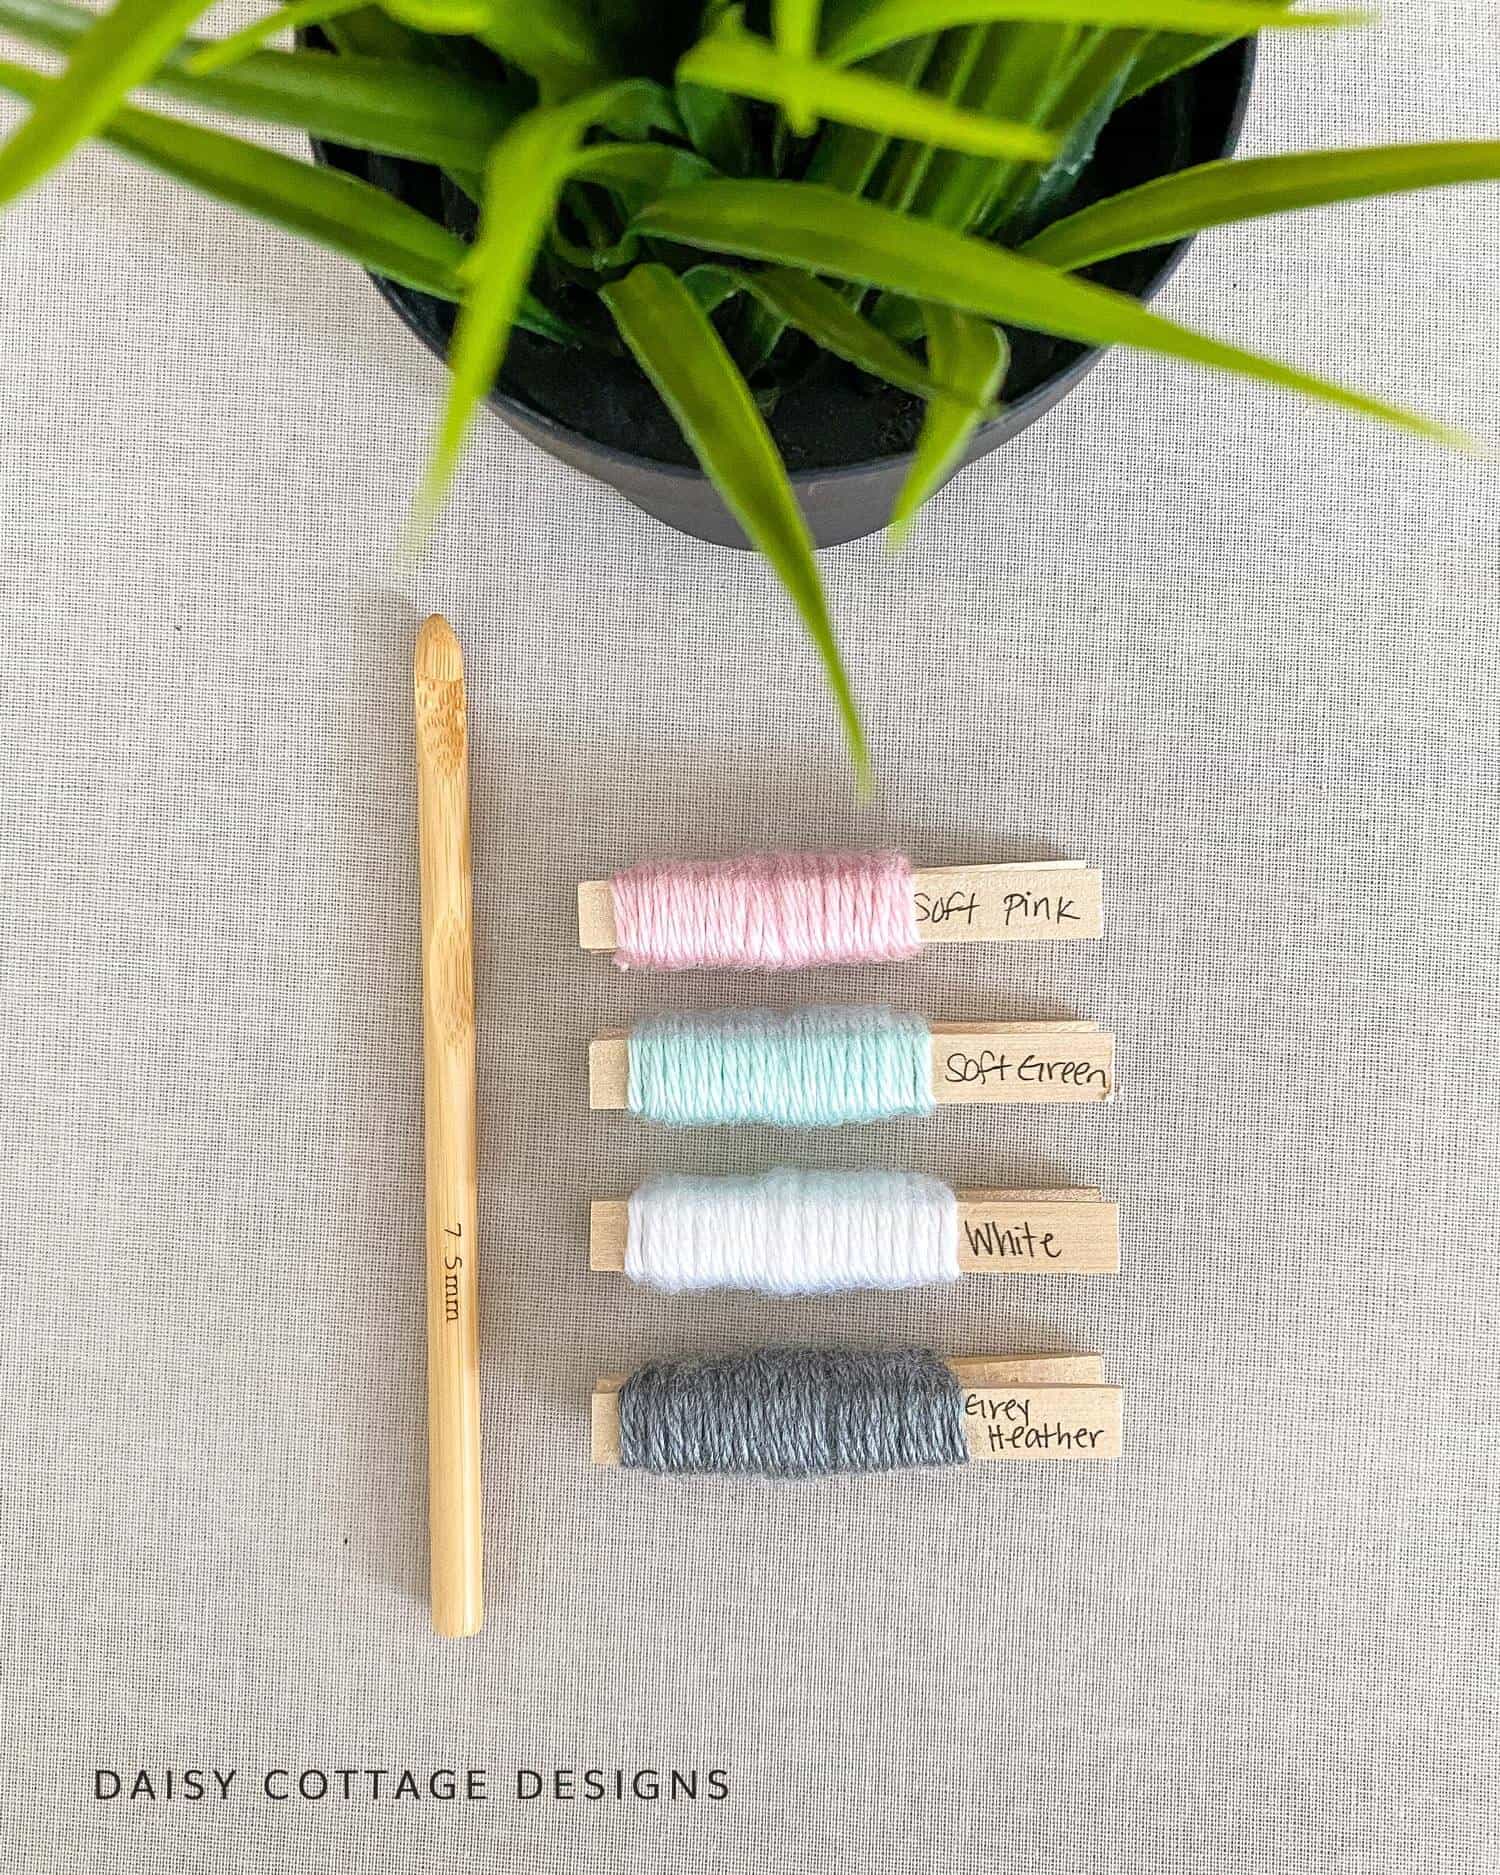 Use this color palette to plan your next crochet project!